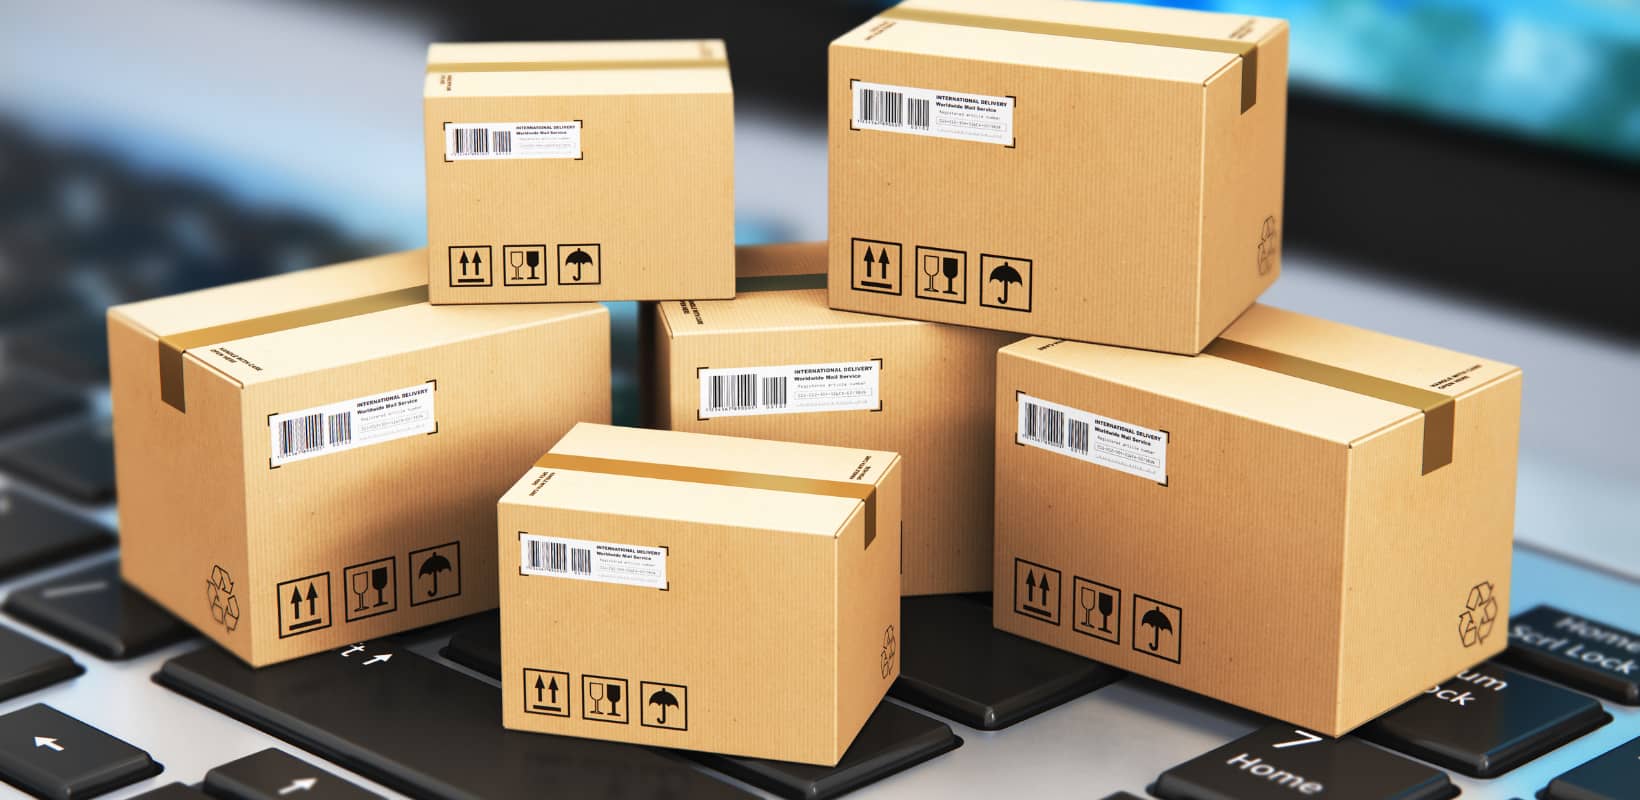 Ultimate Guide on Third-Party Logistics (3PL) E-Commerce Fulfillment Solutions to Scale Your Business